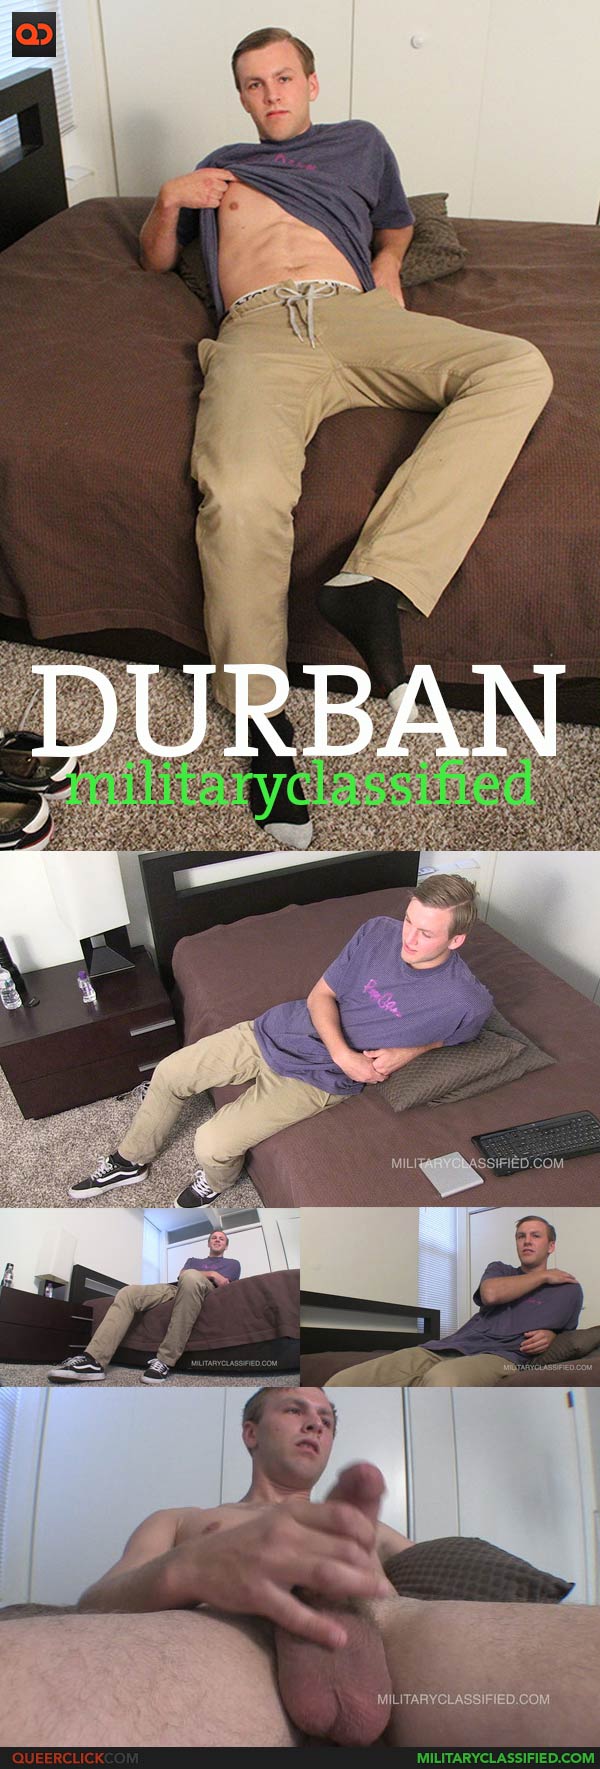 Military Classified: Durban